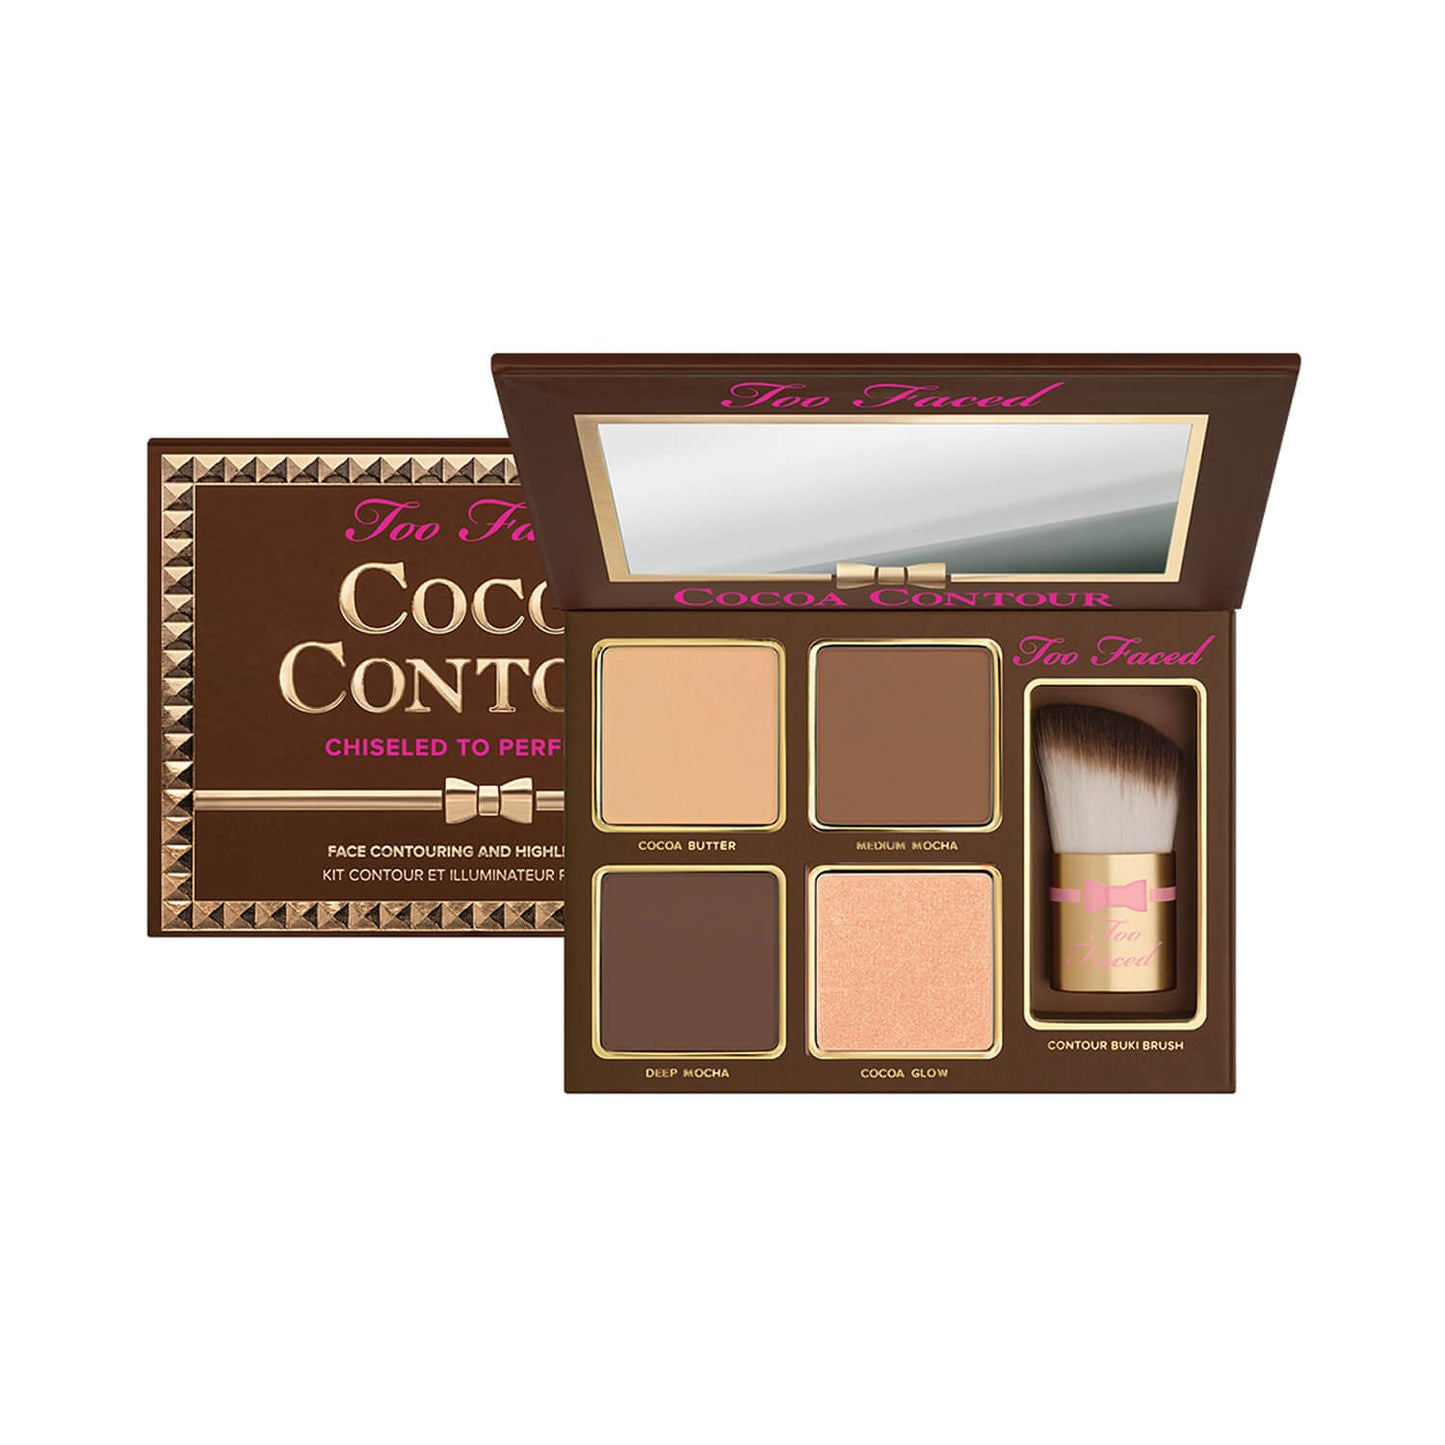 Too Faced Cocoa Contour Chiseled to Perfection Deep